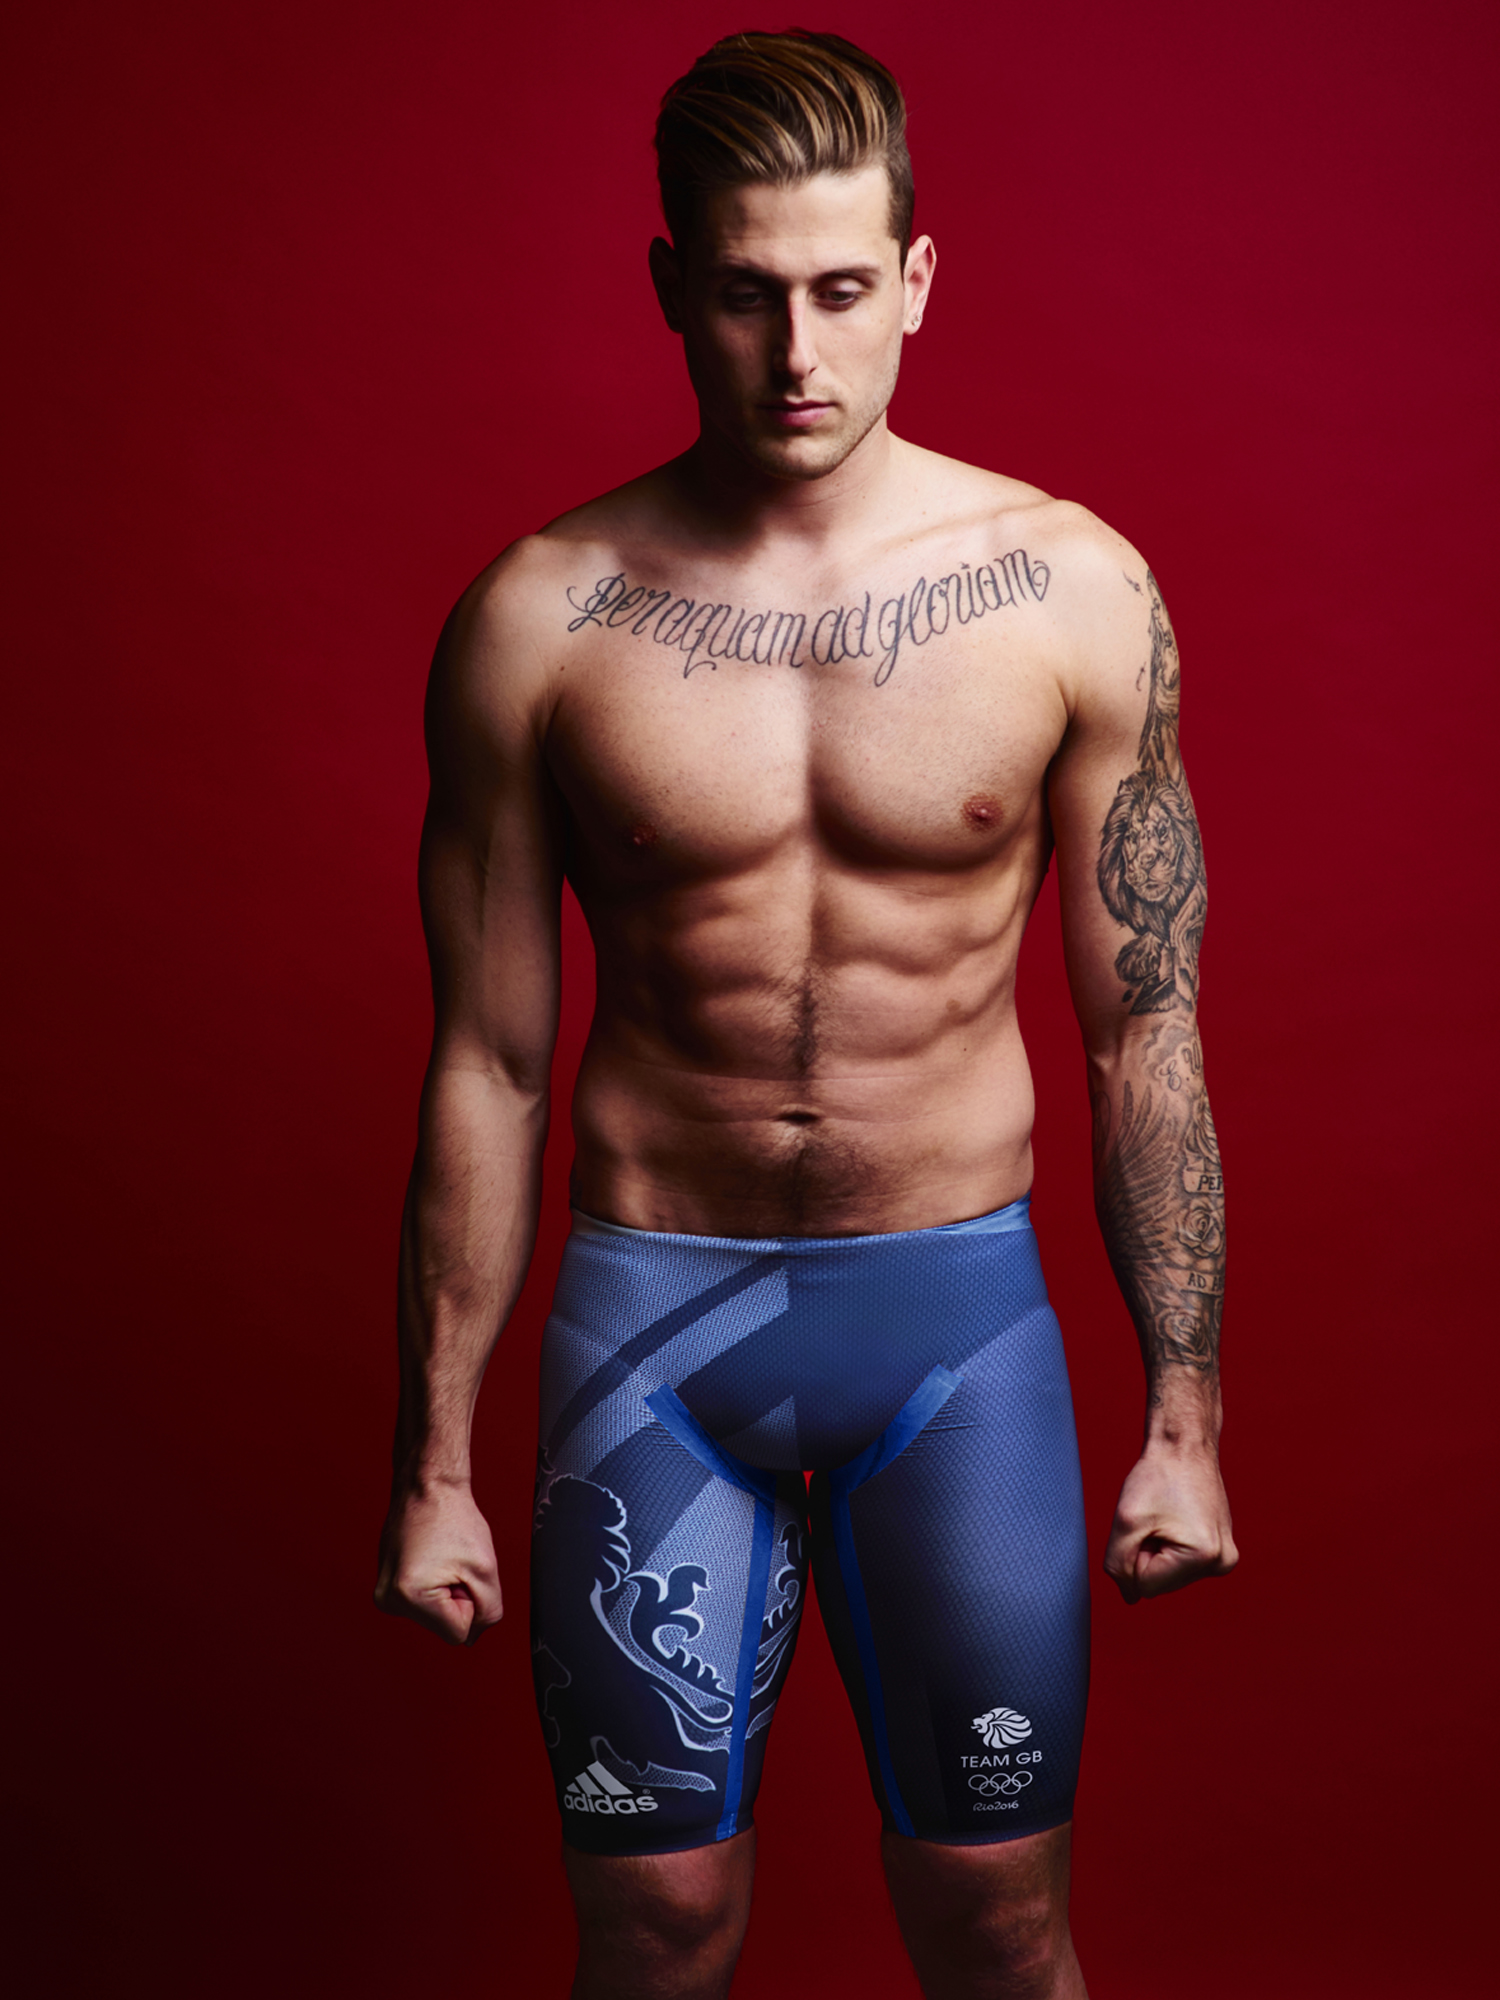 LONDON, ENGLAND - UNDATED: In this handout image from adidas, Team GB athlete Chris Walker-Hebborn pictured in adidas Team GB Rio 2016 Olympic kit in London, England. (Photo by Ben Duffy/adidas/Handout/Getty Images)